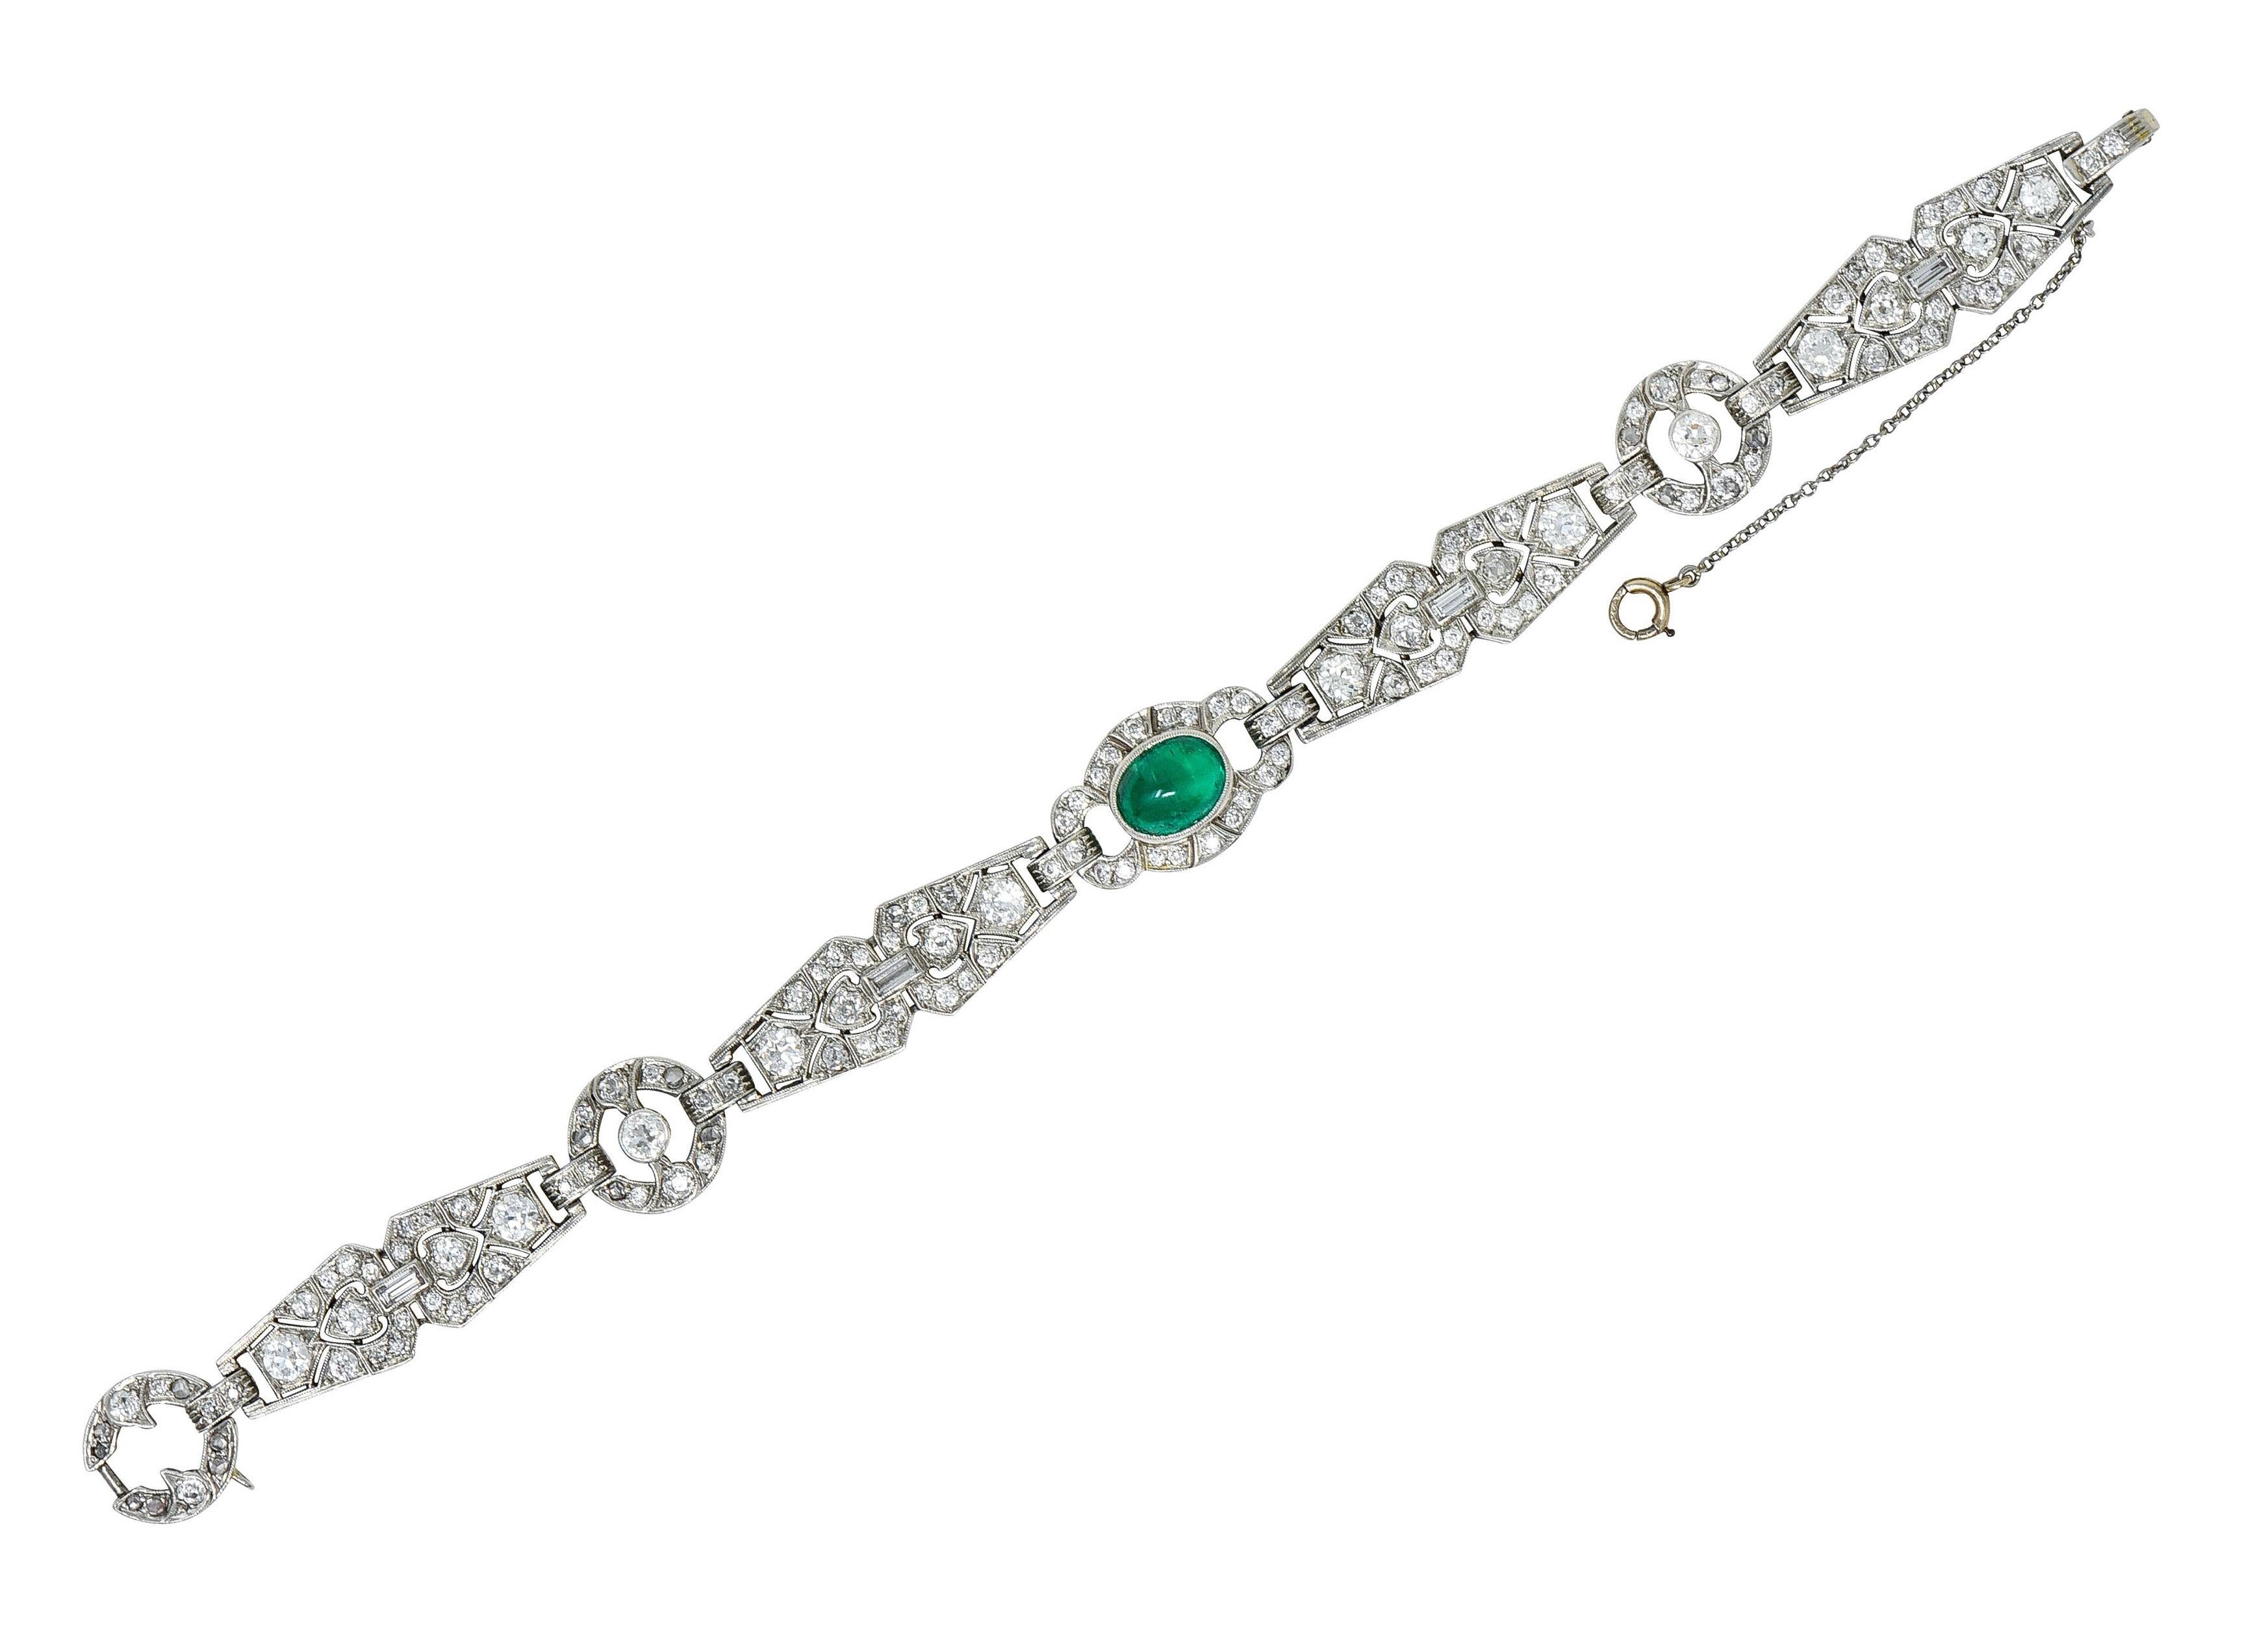 Bracelet is comprised of geometric links with fanciful milgrain edges

Featuring an oval double cabochon of emerald weighing approximately 2.50 carats

Slightly bluish and strongly green in color while exhibiting semi-transparency due to natural